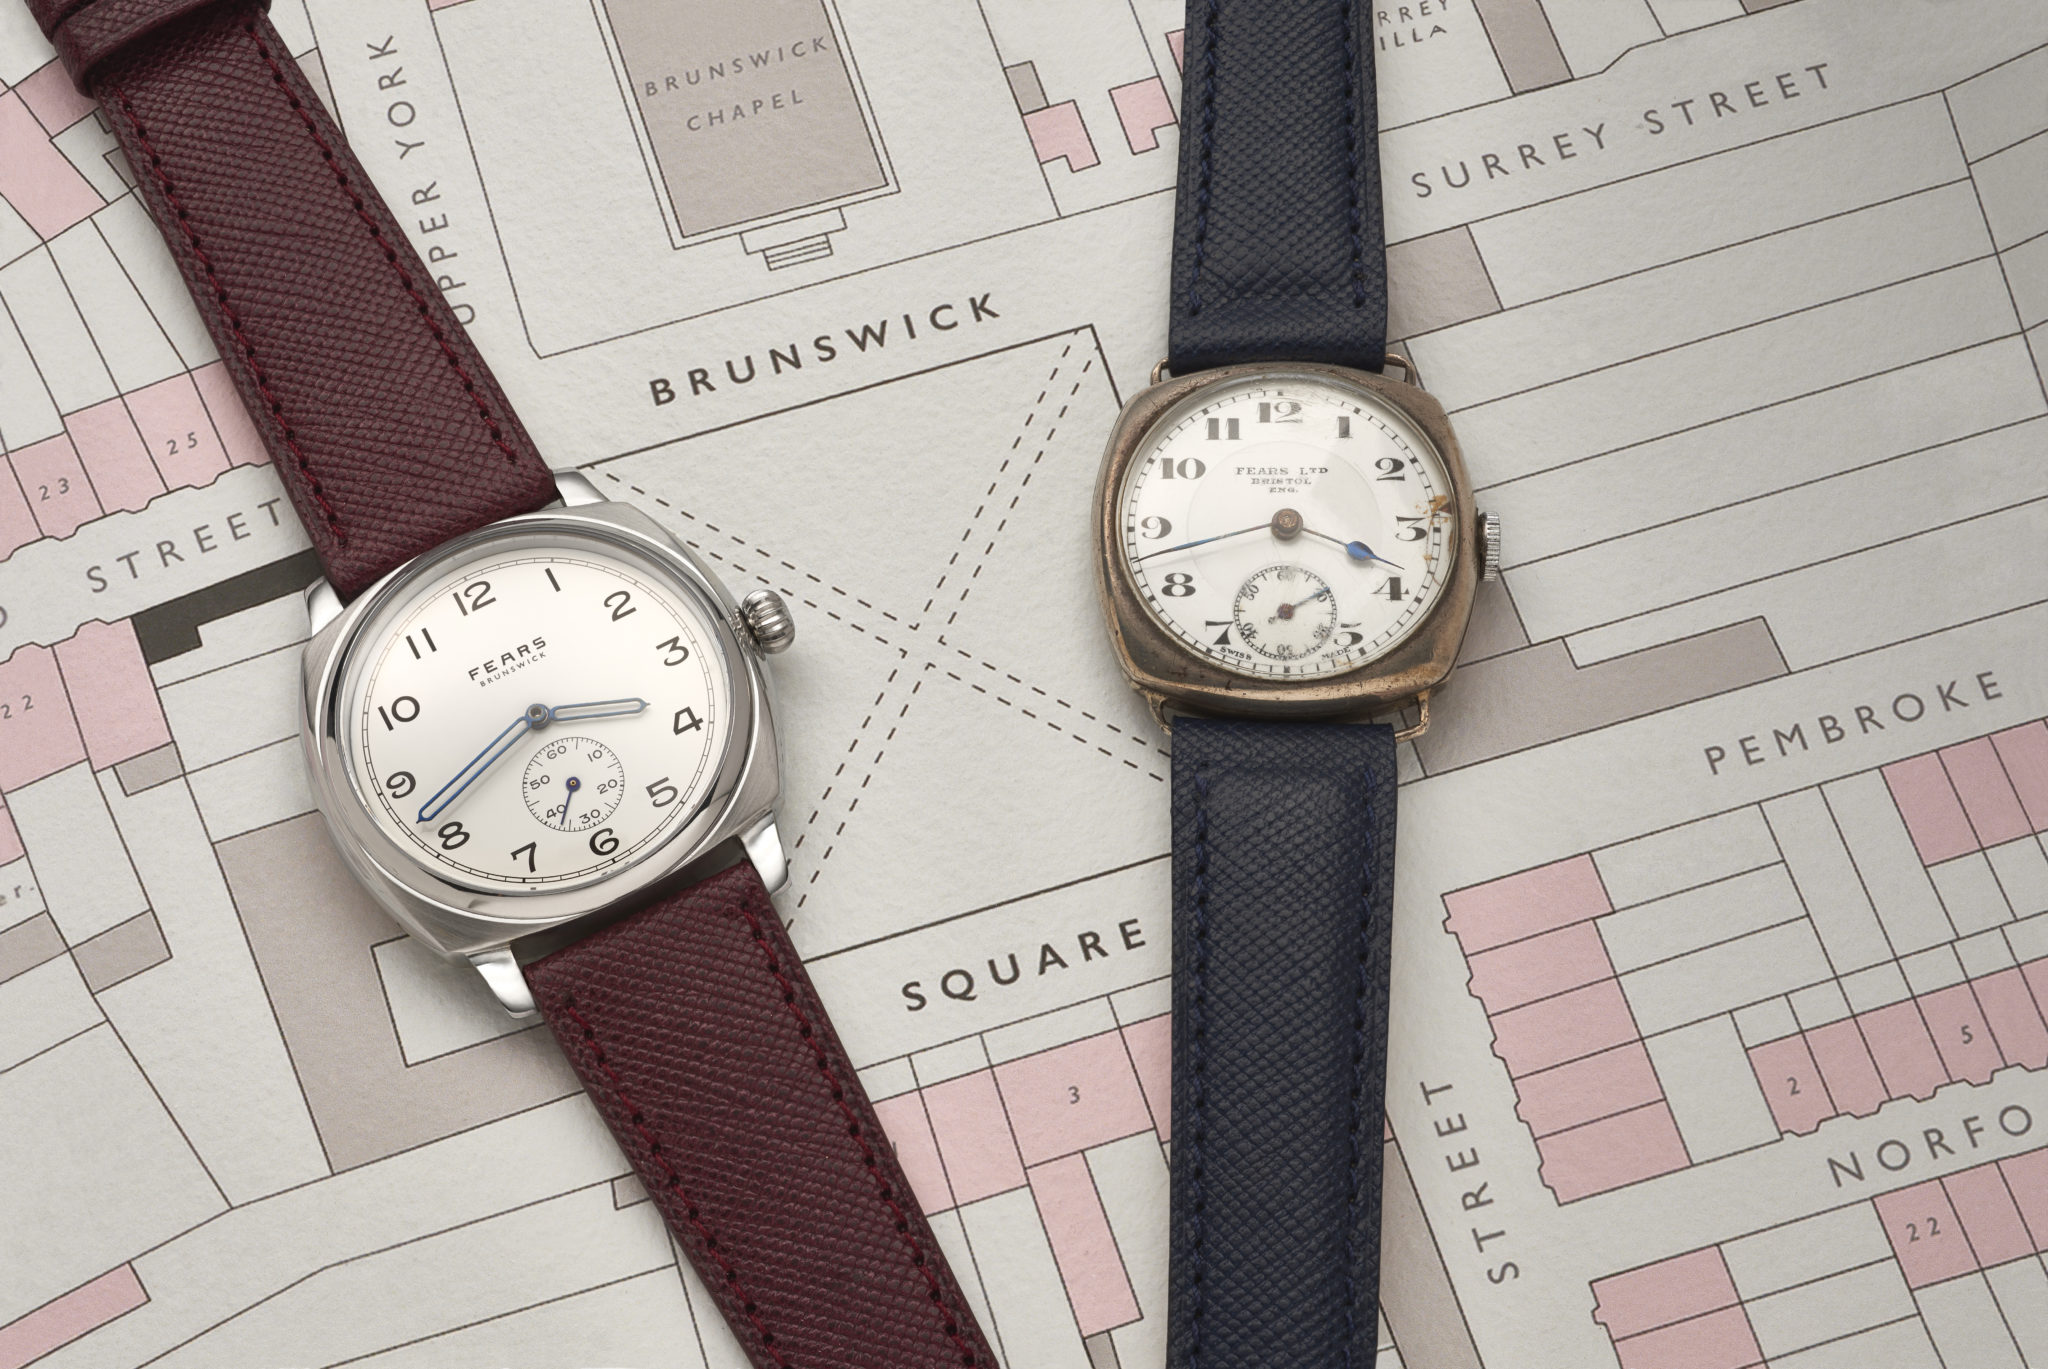 Fears brunswick enamel white dial on passport red fears strap with 1924 fears watch that inspired the brunswick